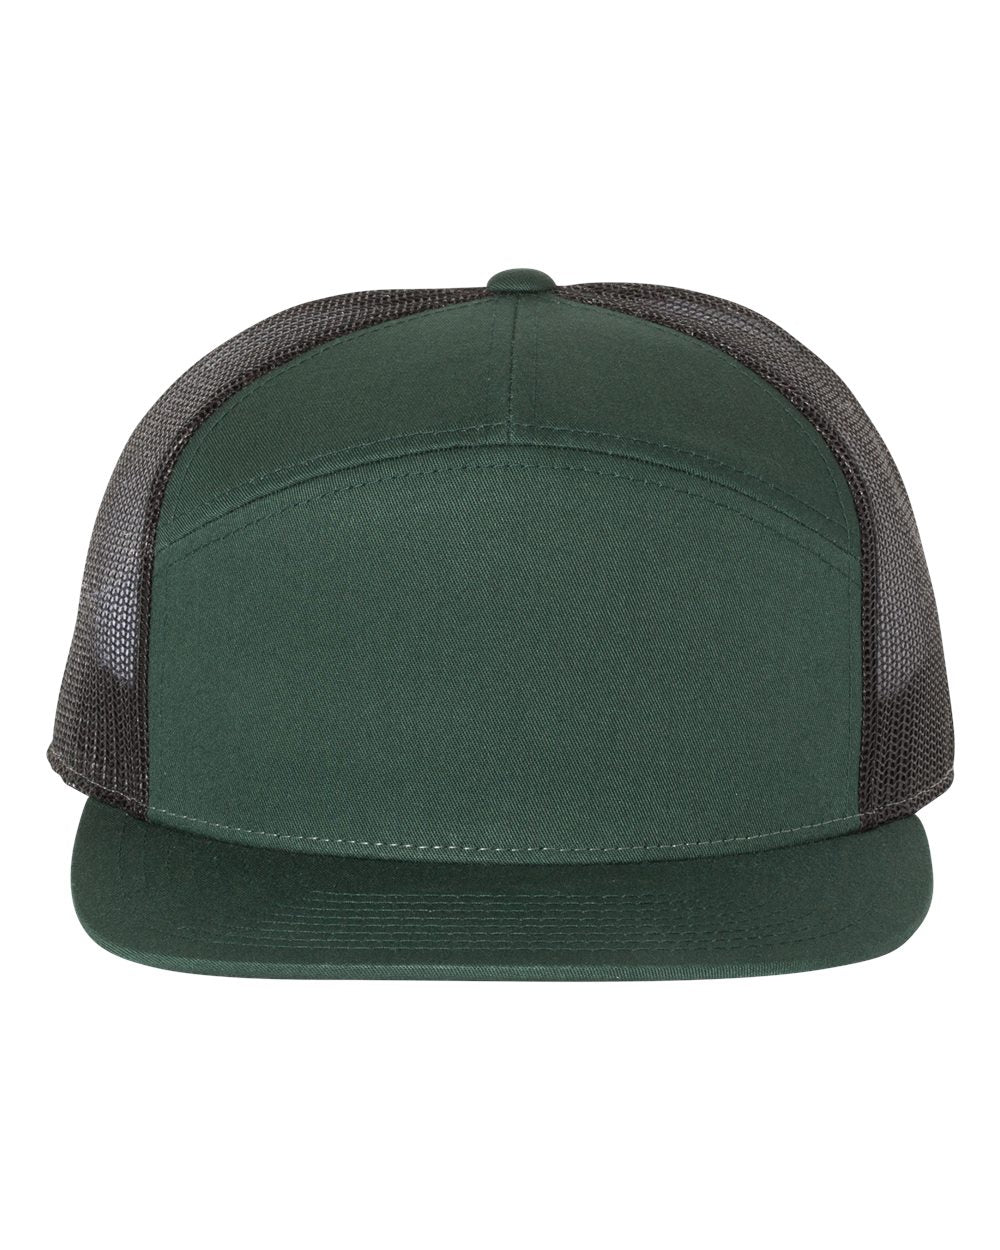 Richardson 168 Customized Trucker Hat with Leather Patch